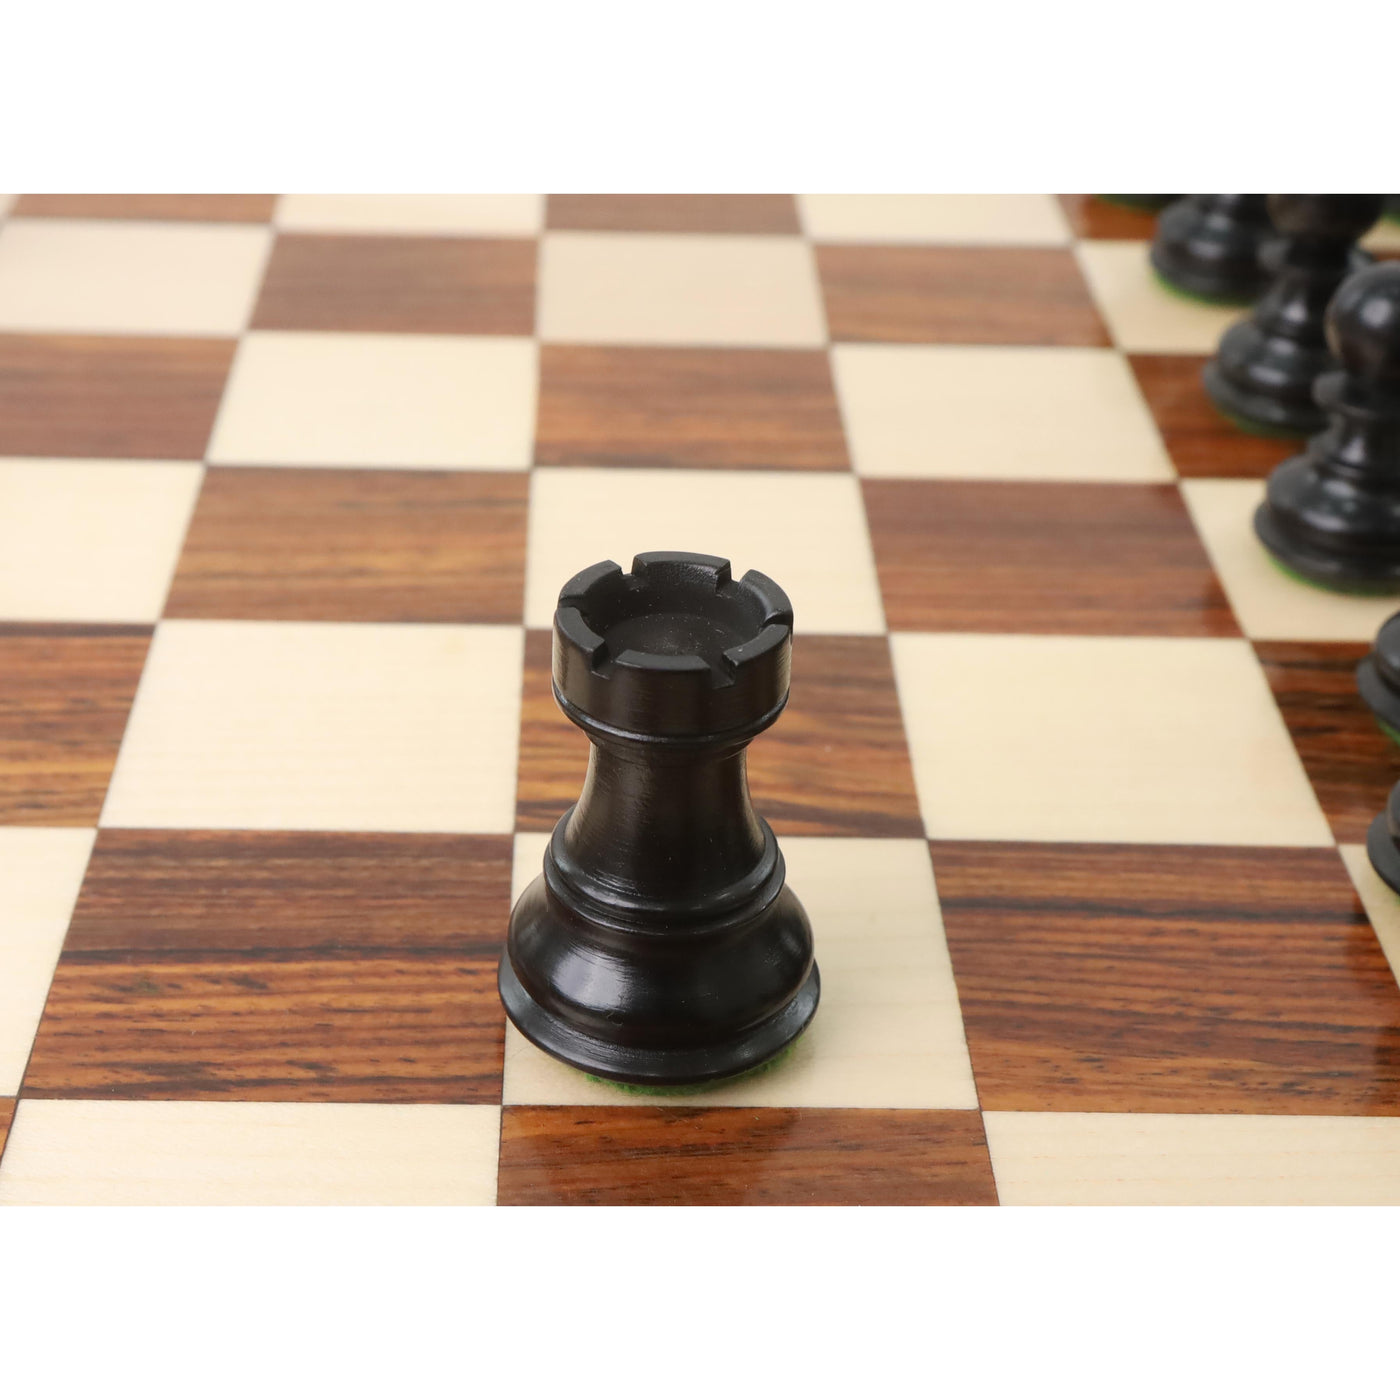 2.6" Russian Zagreb Chess set Combo - Pieces in Ebonised Boxwood with Board & Box